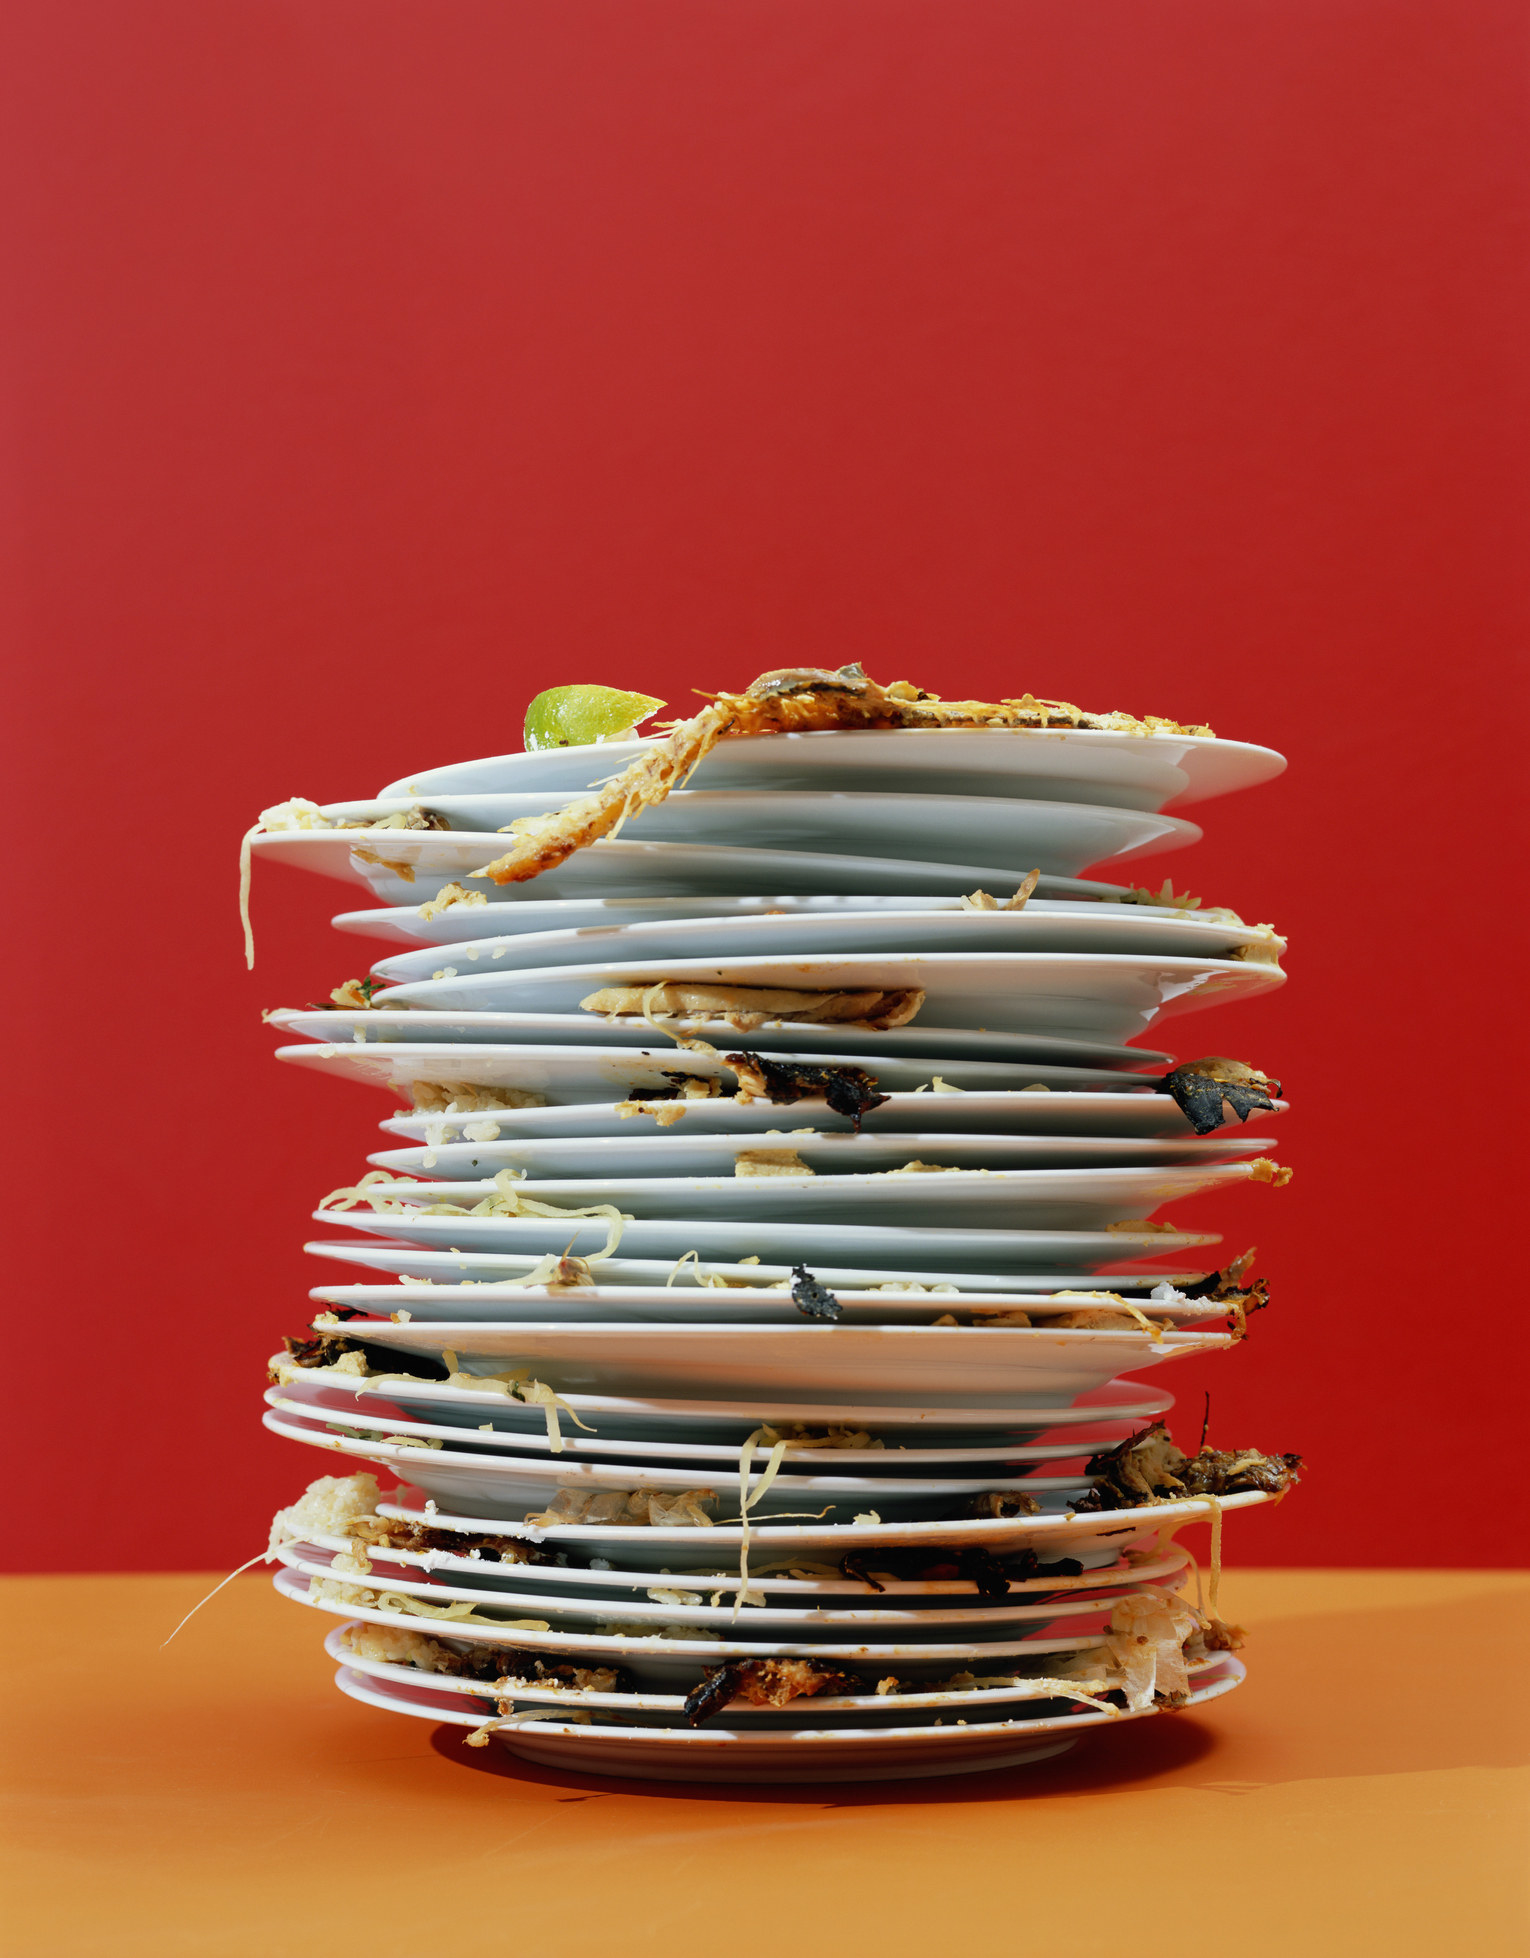 Many plates containing food stacked on top of one another